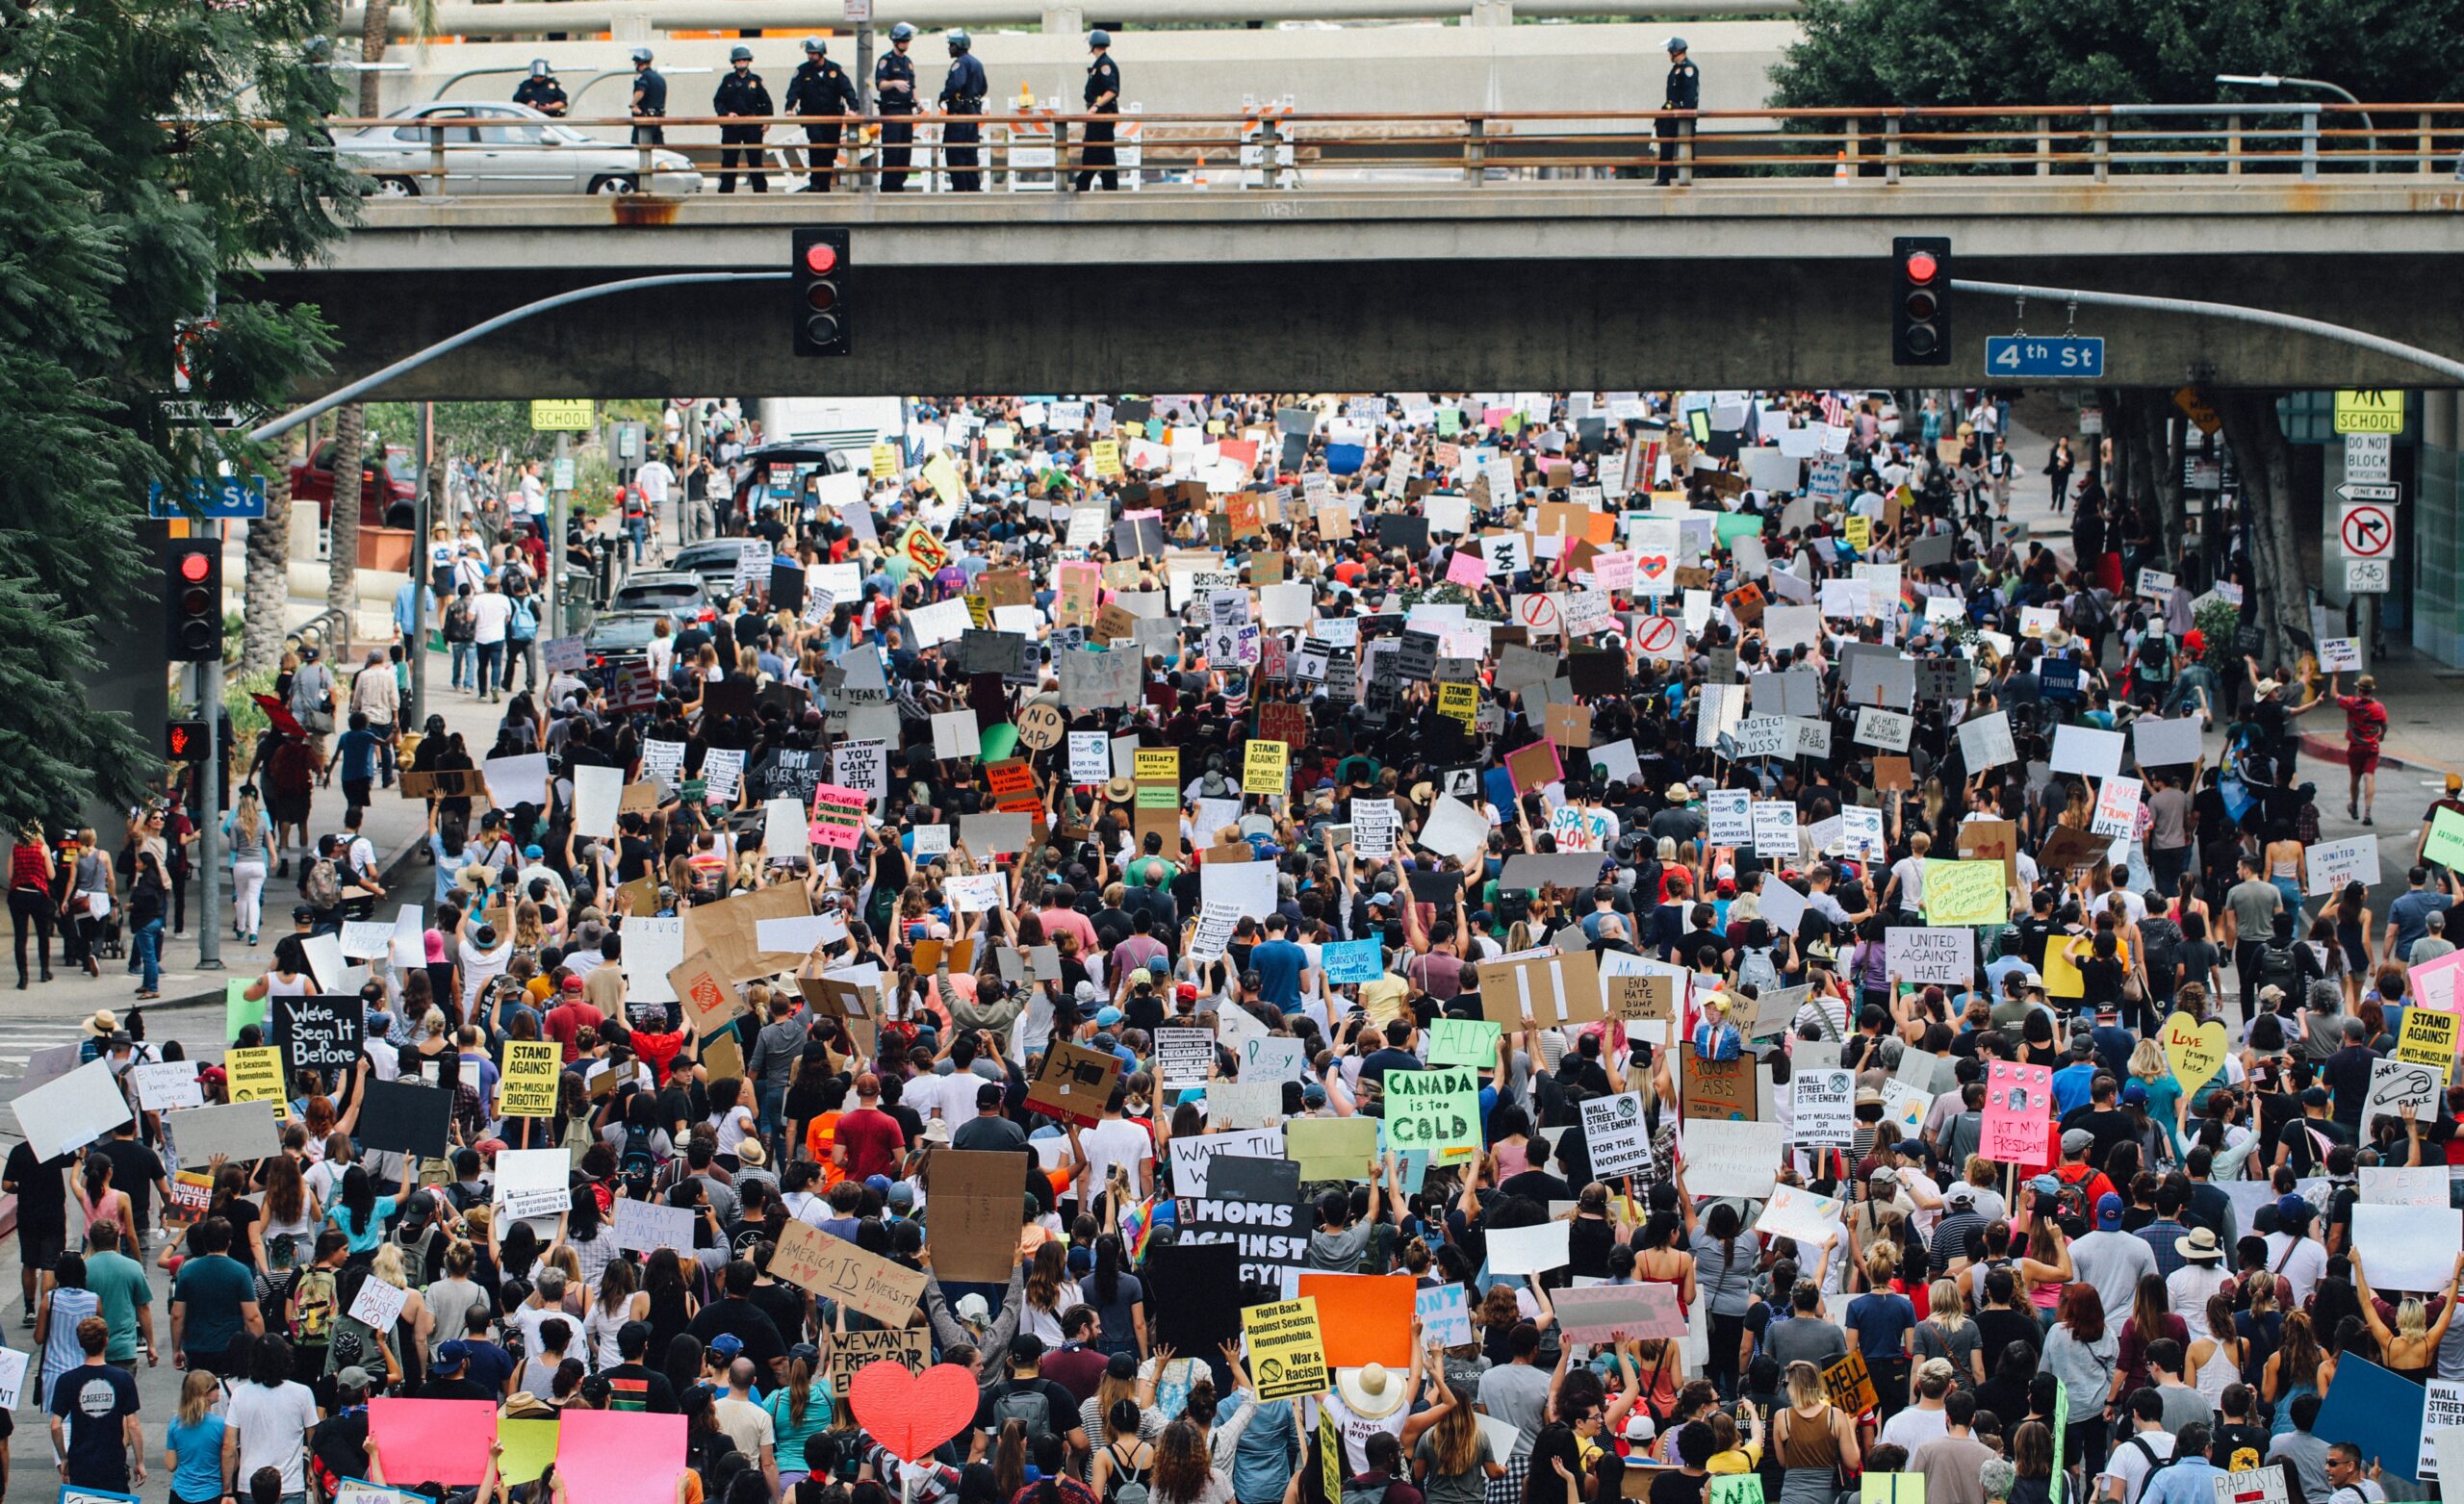 Image of crown protesting in Los Angeles. The crowd passes under a bridge where police watch the crowd from above.